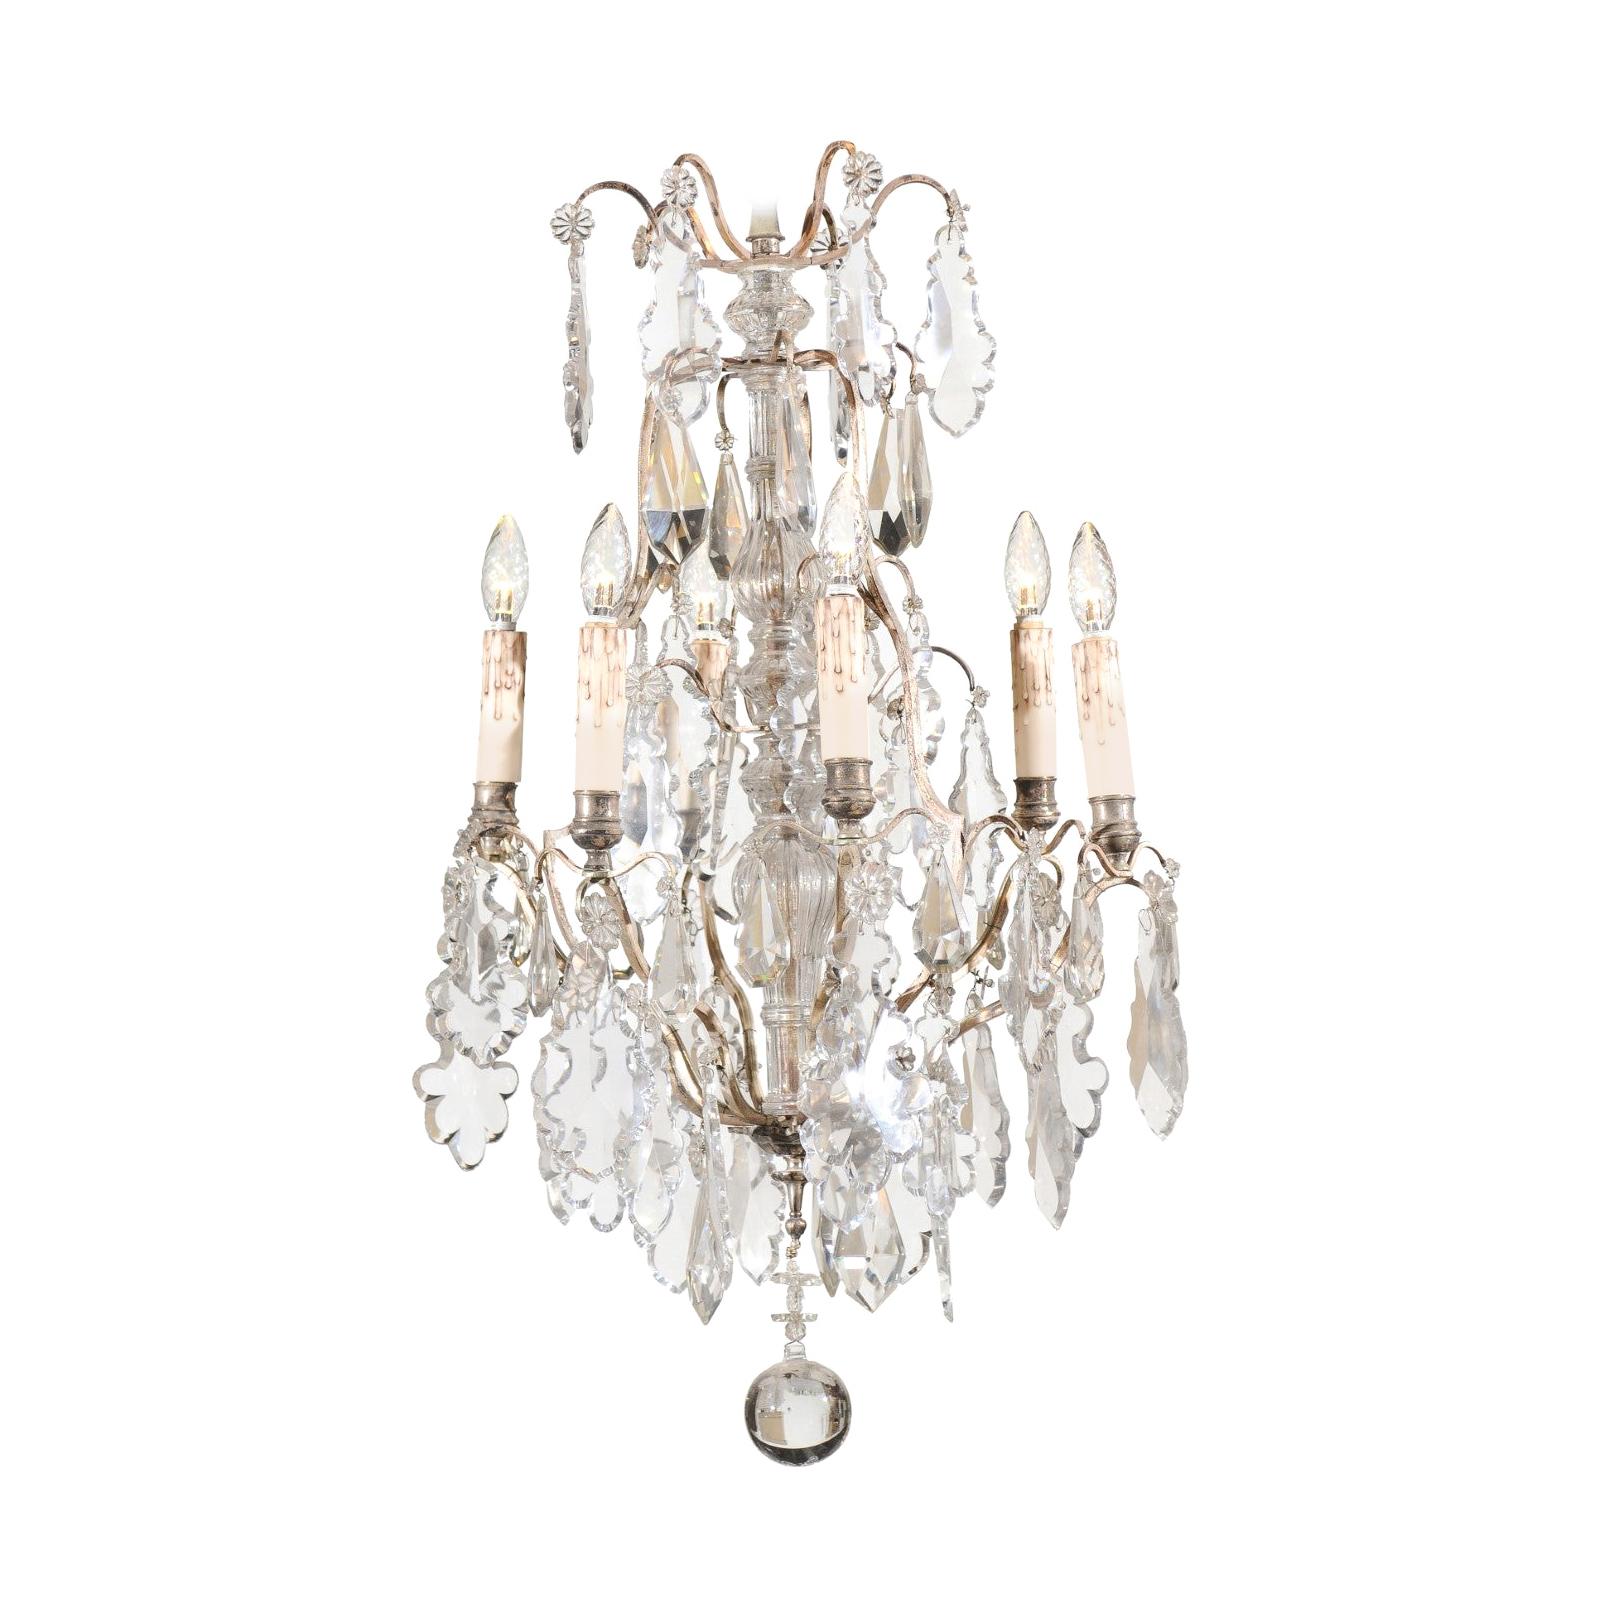 French 19th Century Six-Light Crystal Chandelier with Silvered Armature For Sale